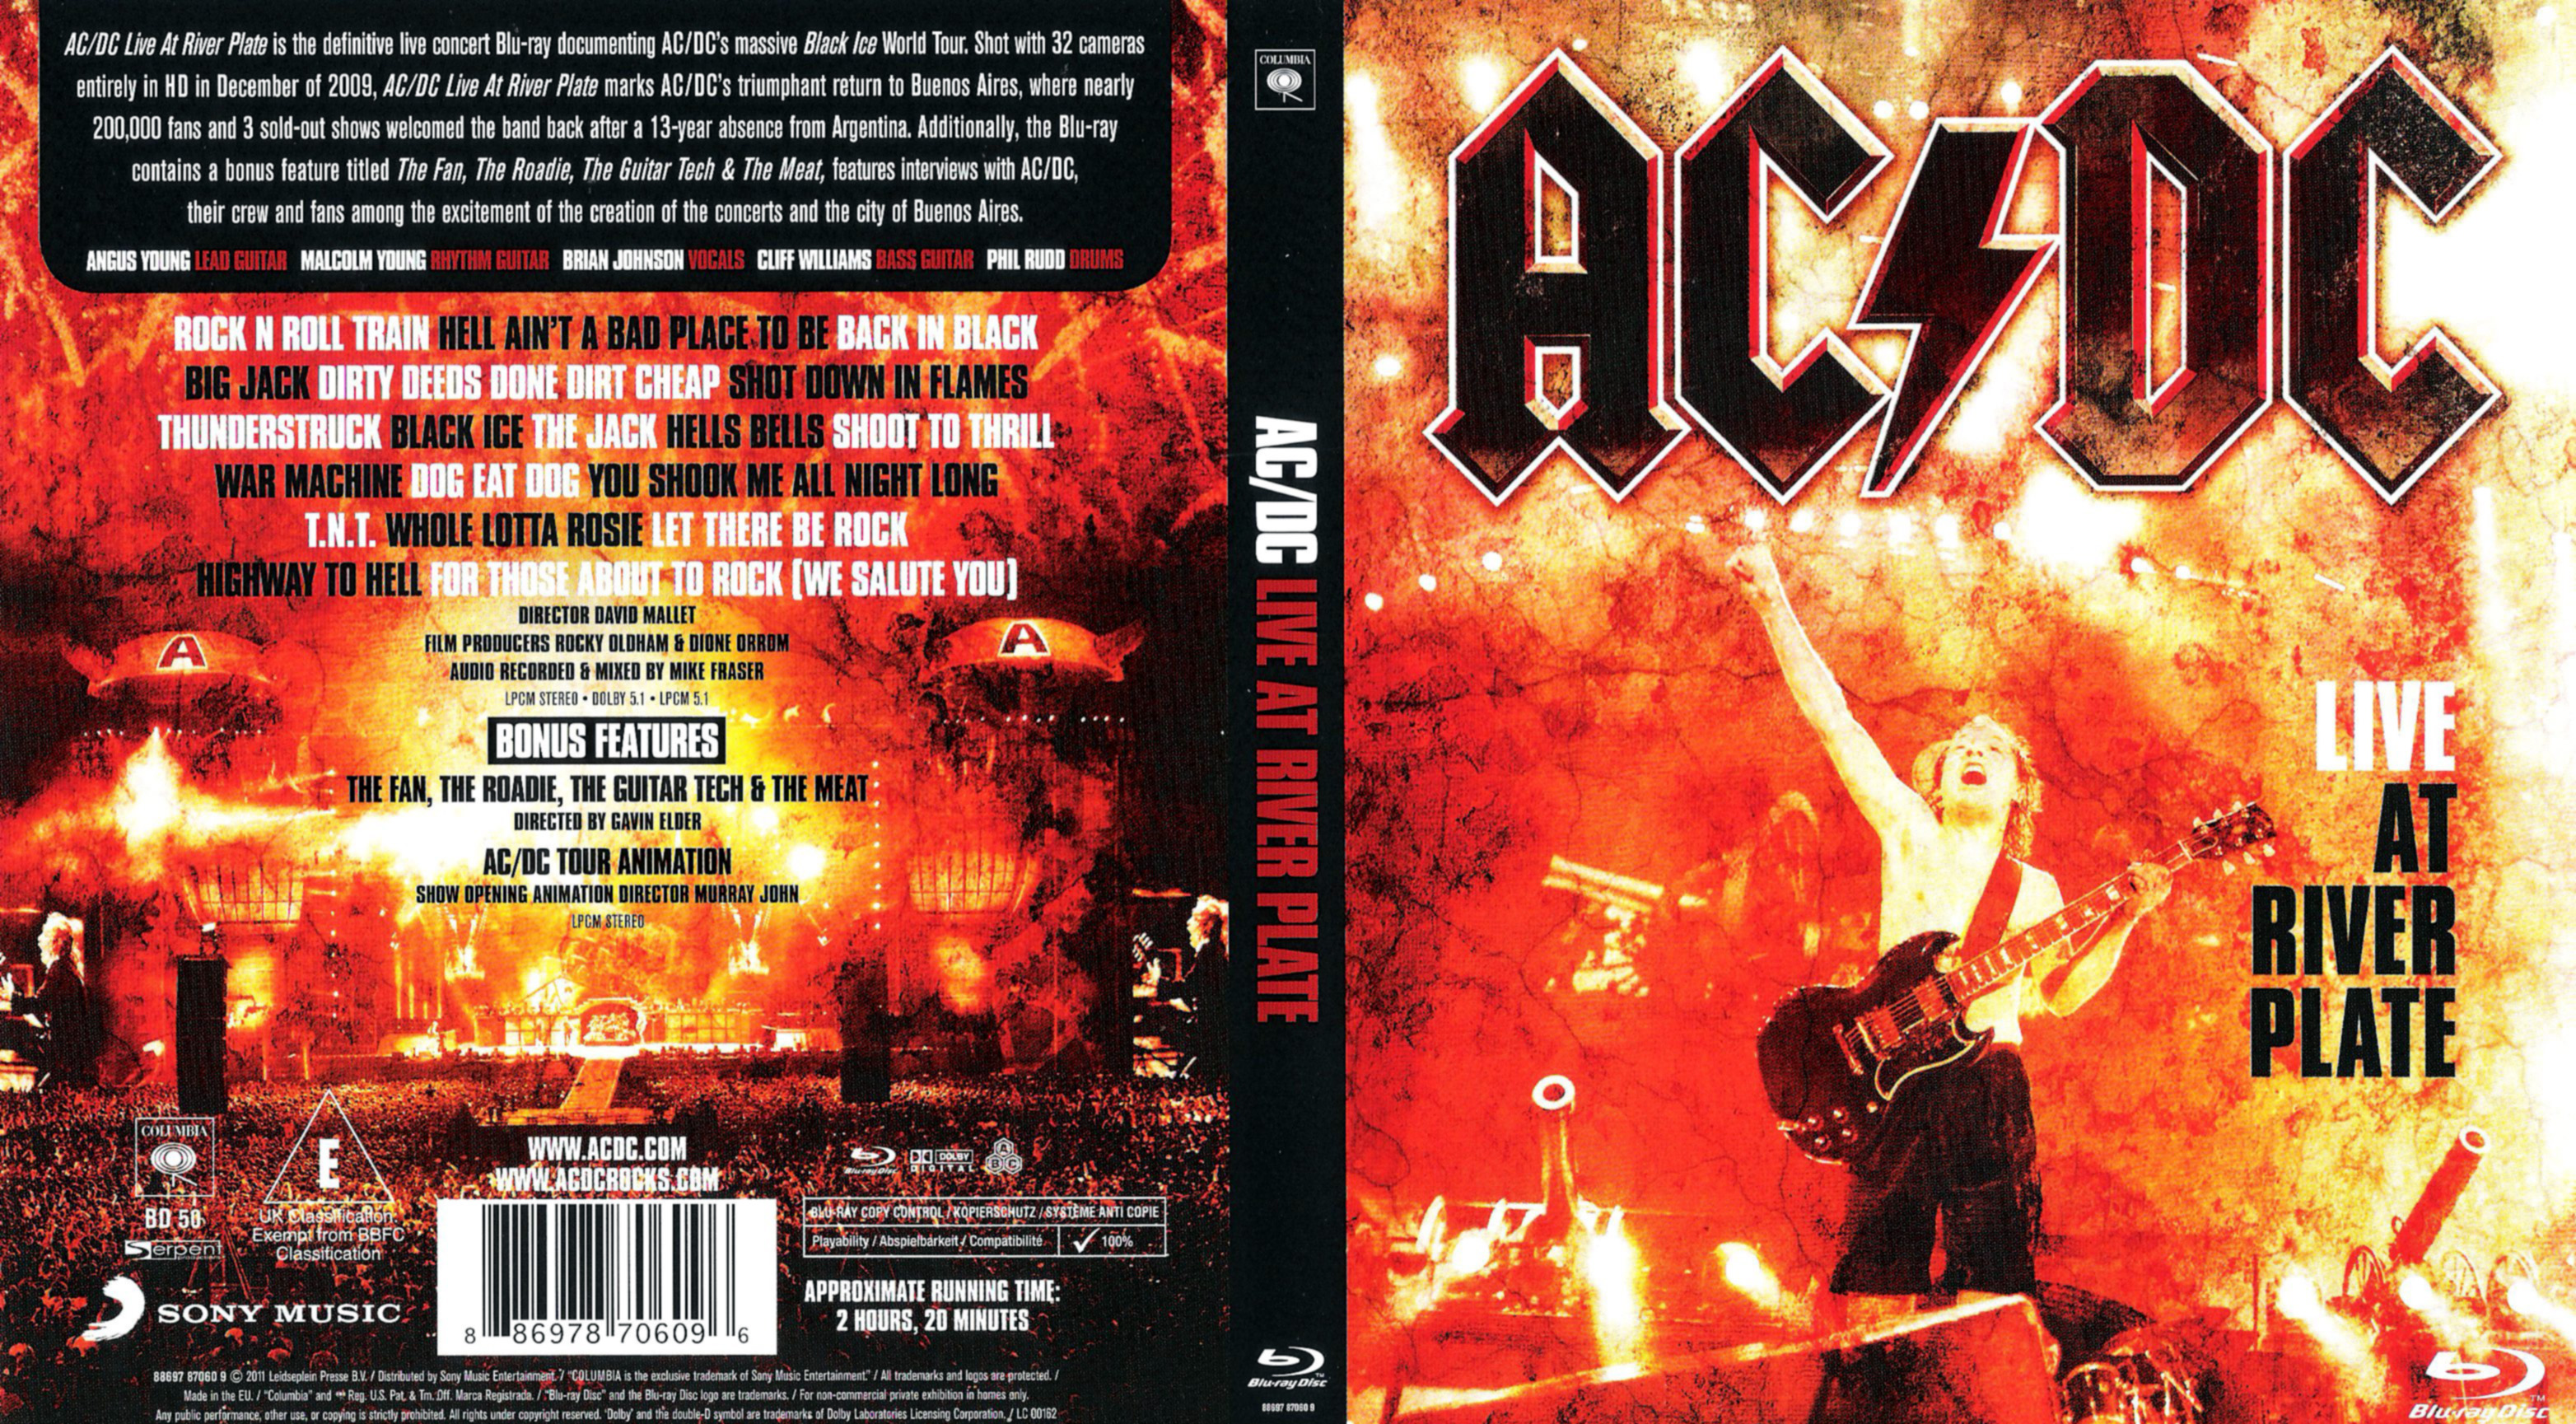 Jaquette DVD ACDC Live at River Plate 2009 (BLU-RAY)